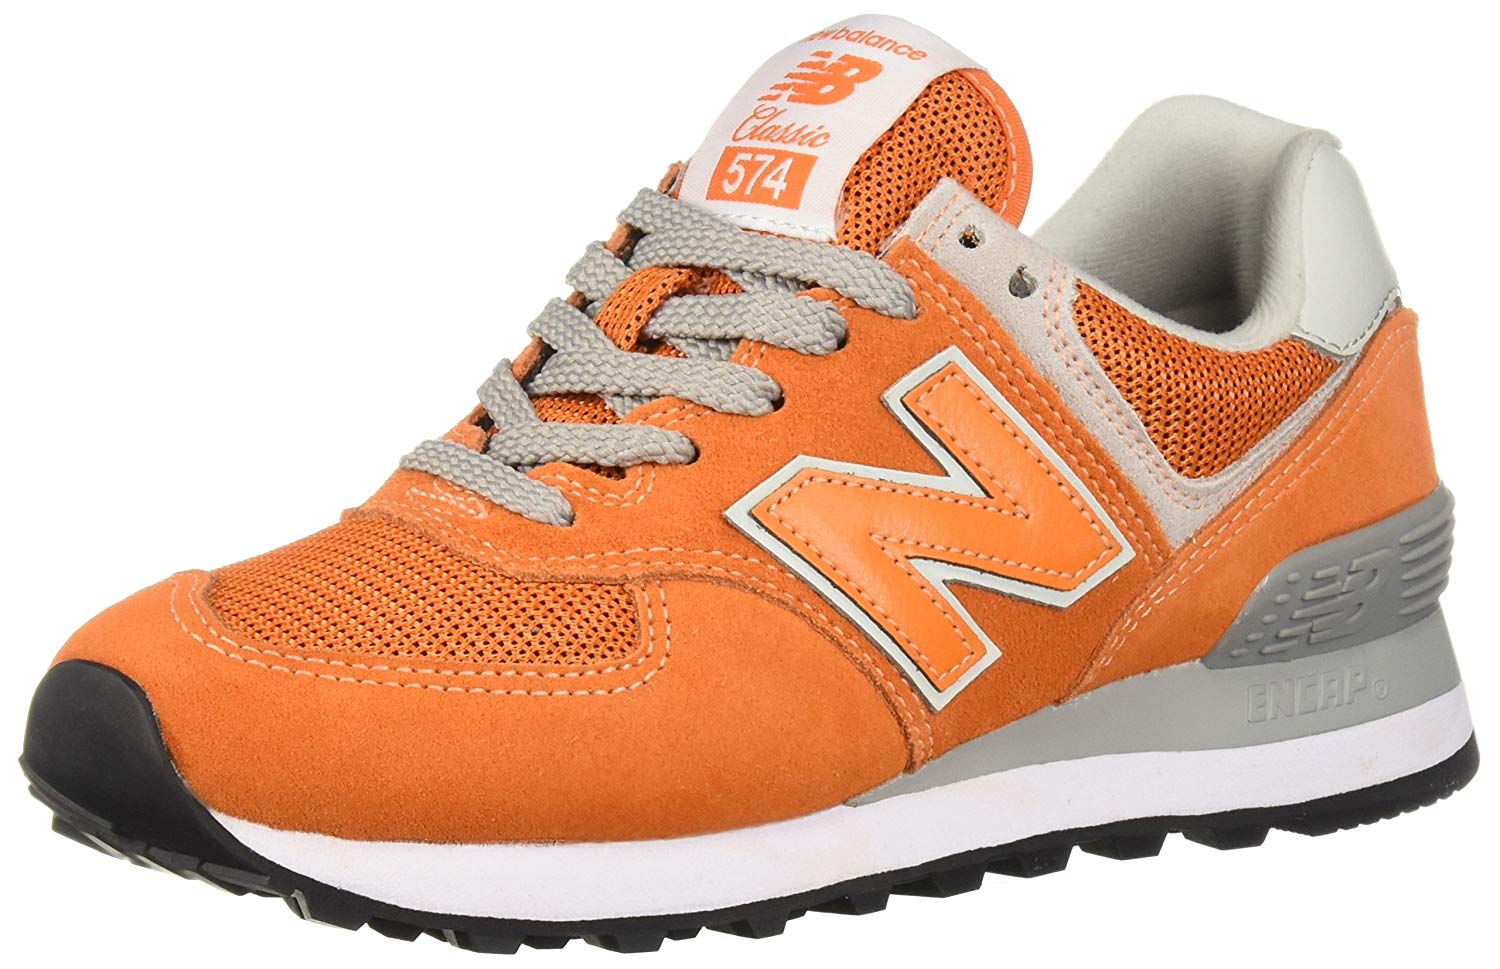 New Balance 574 Reviewed for 